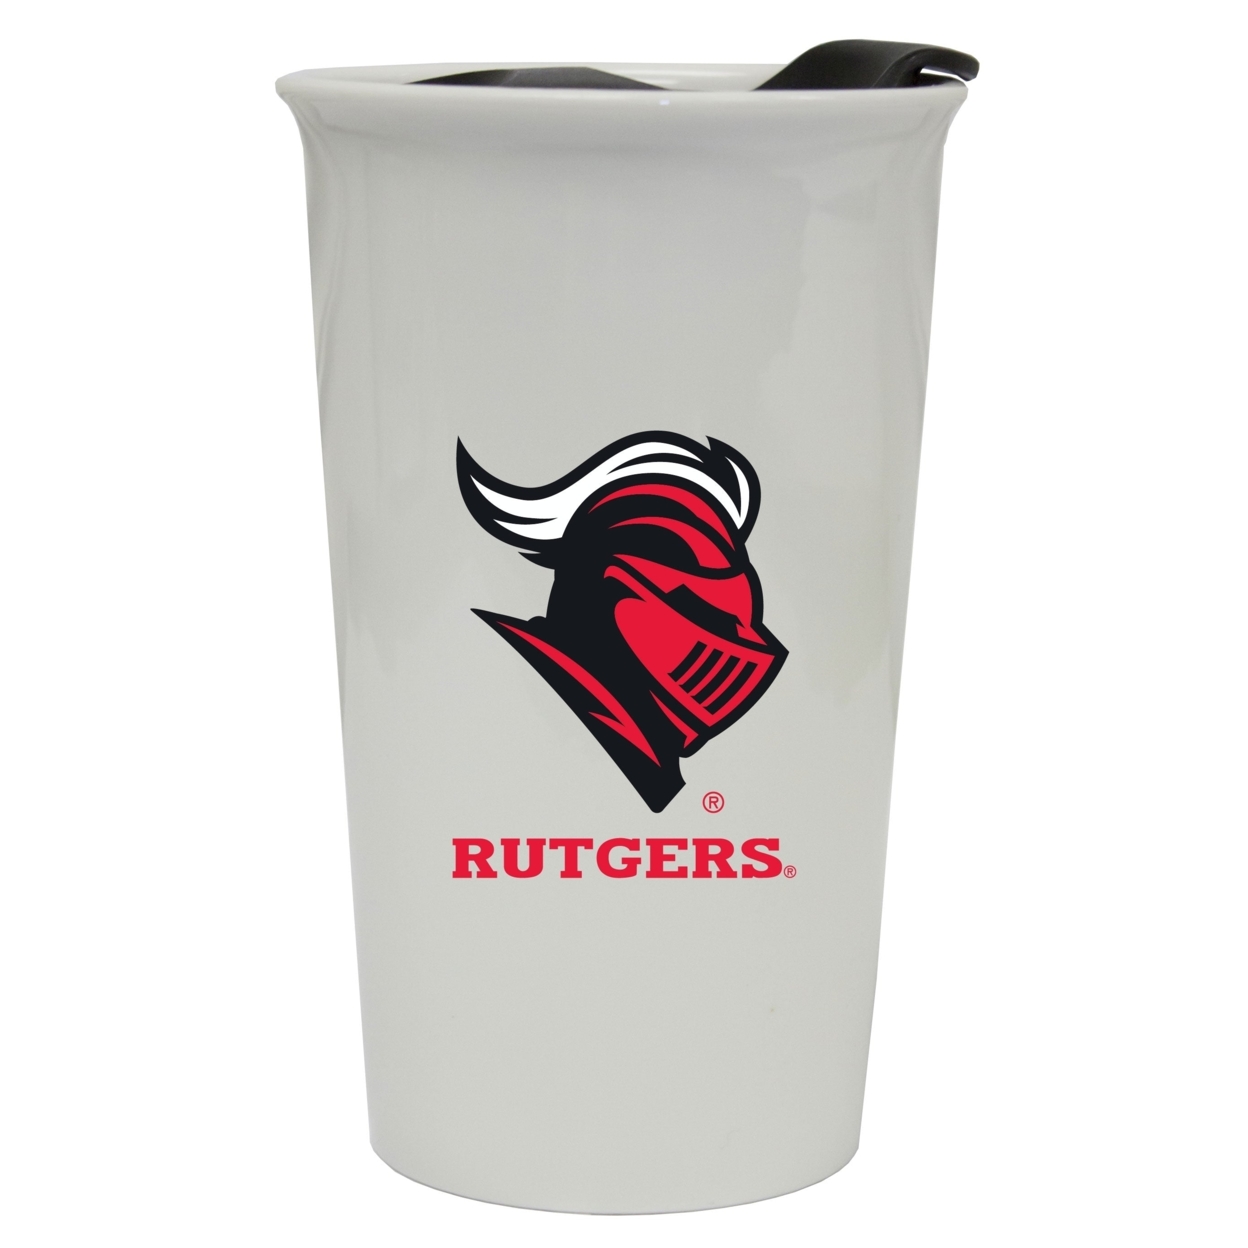 Rutgers Scarlet Knights Double Walled Ceramic Tumbler